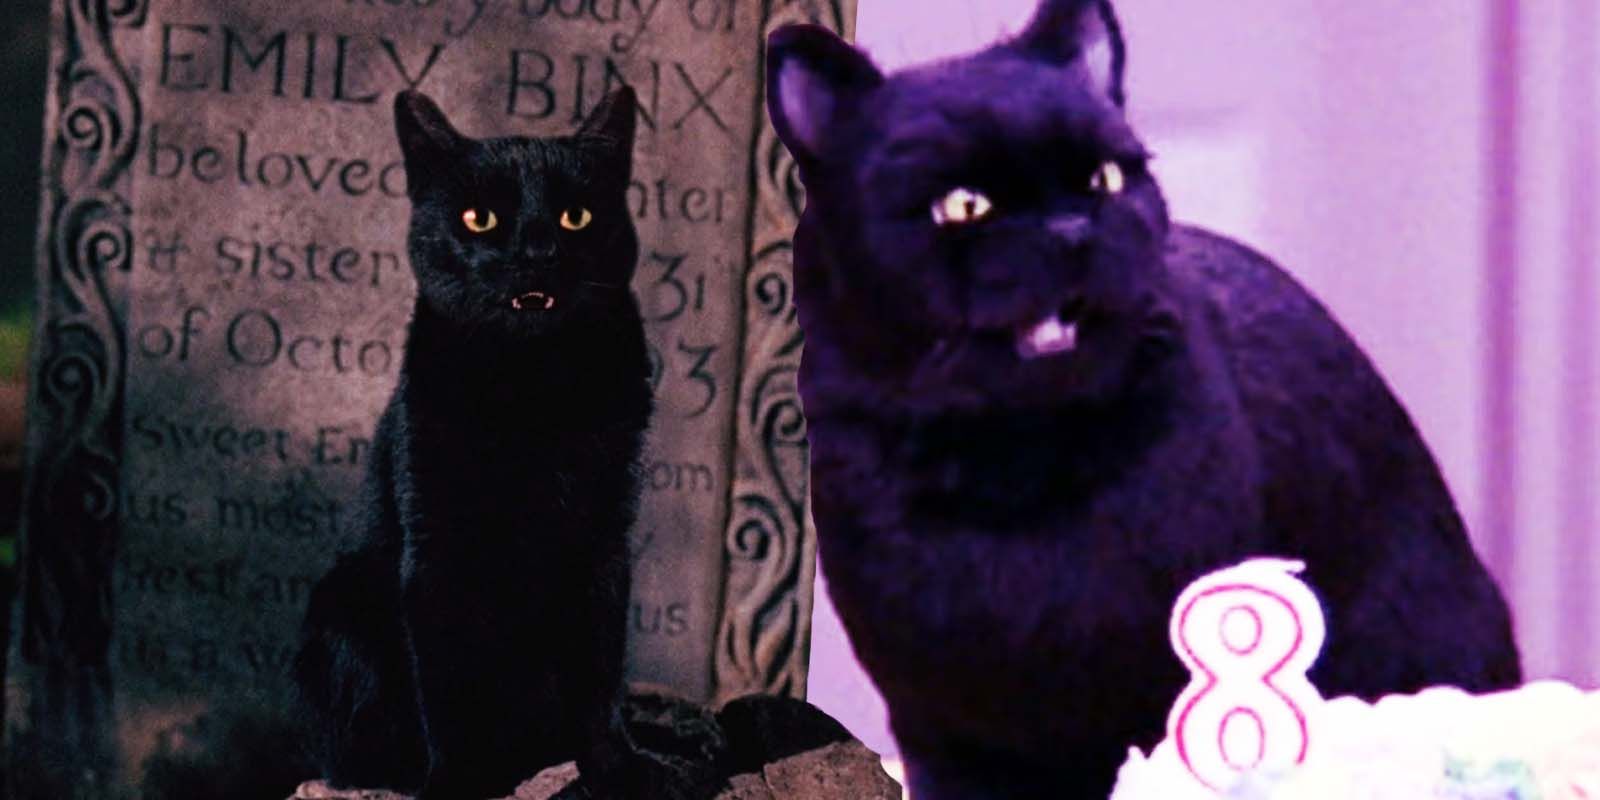 Thackery Binx in 1993's Hocus Pocus and Salem in Sabrina The Teenage Witch